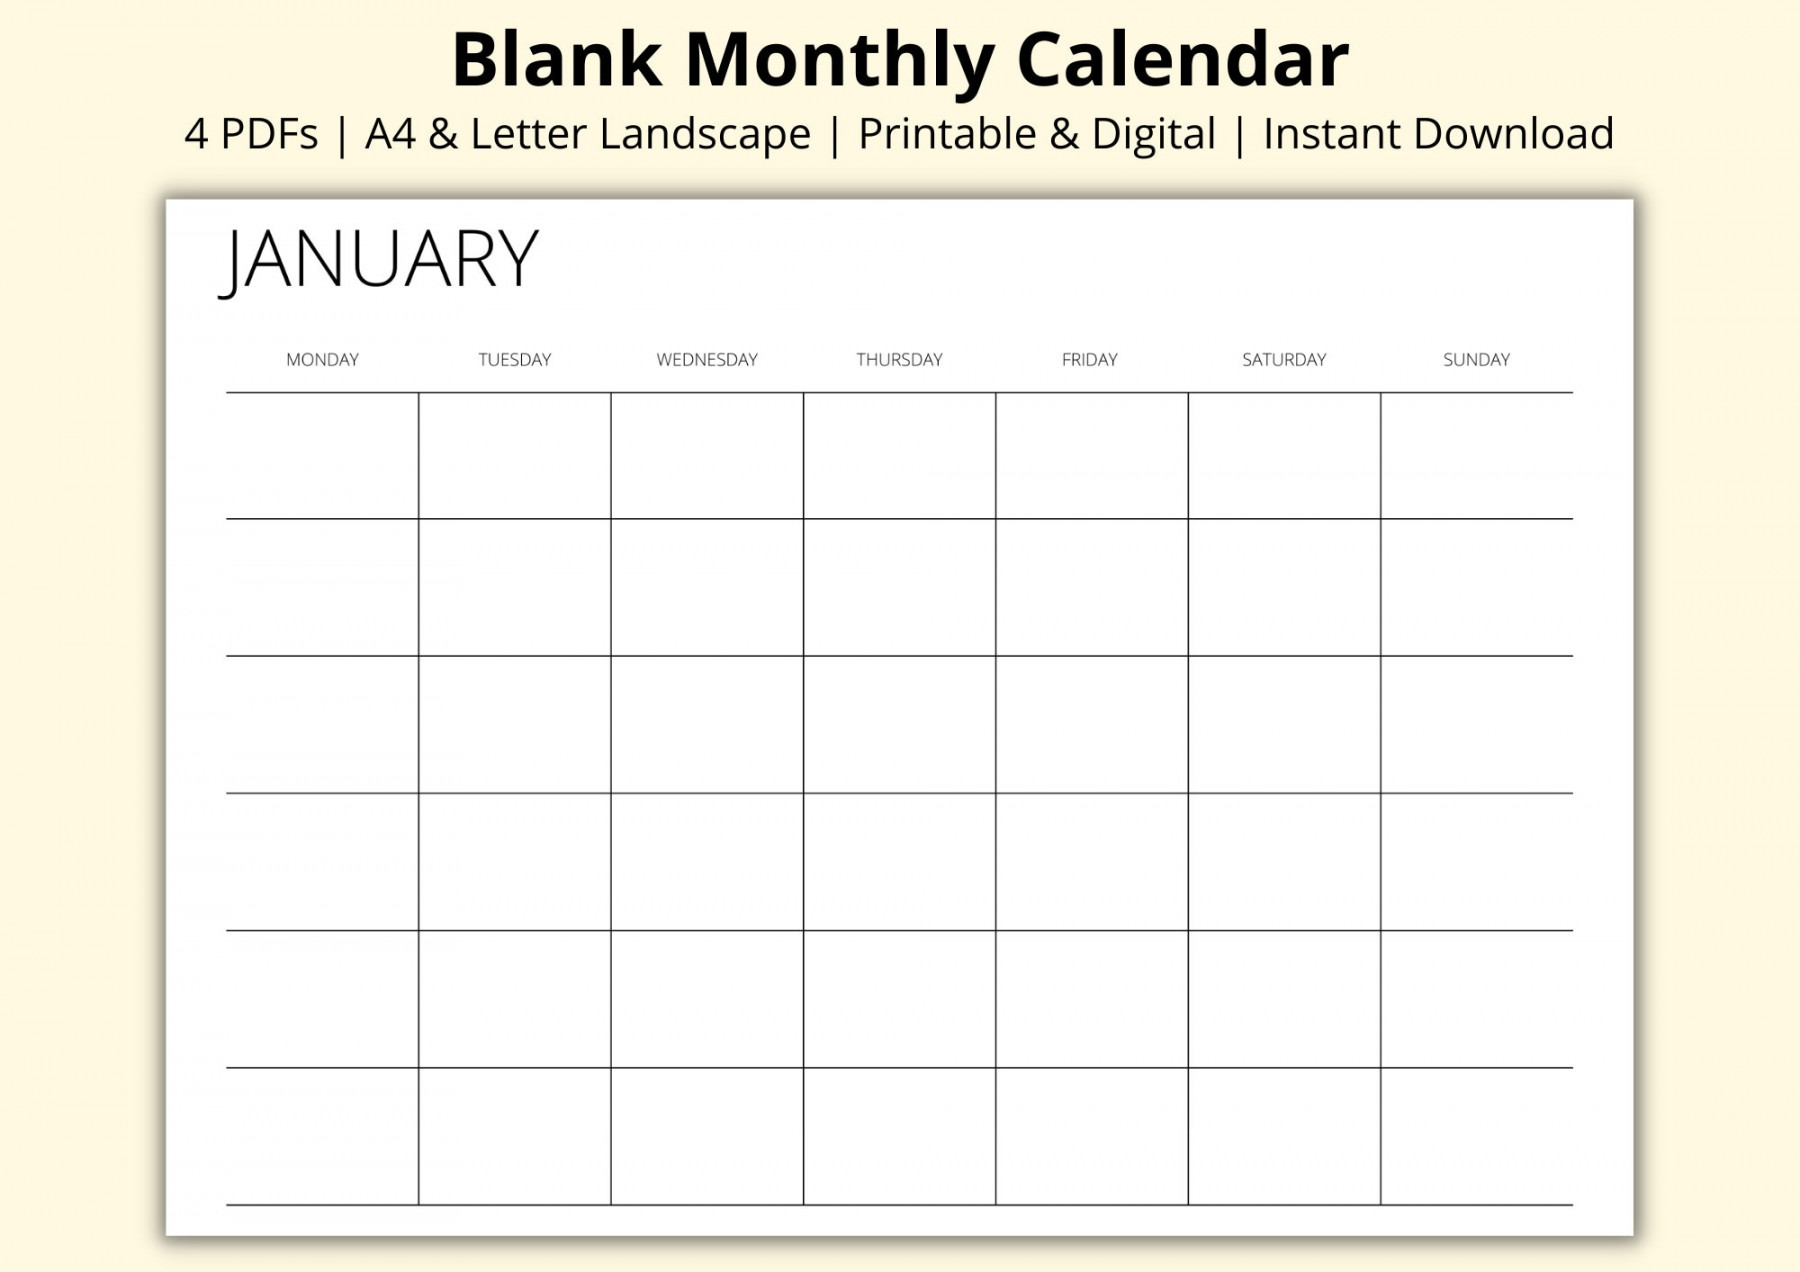 Blank Monthly Calendar Template  Month Calendar Pages - Etsy